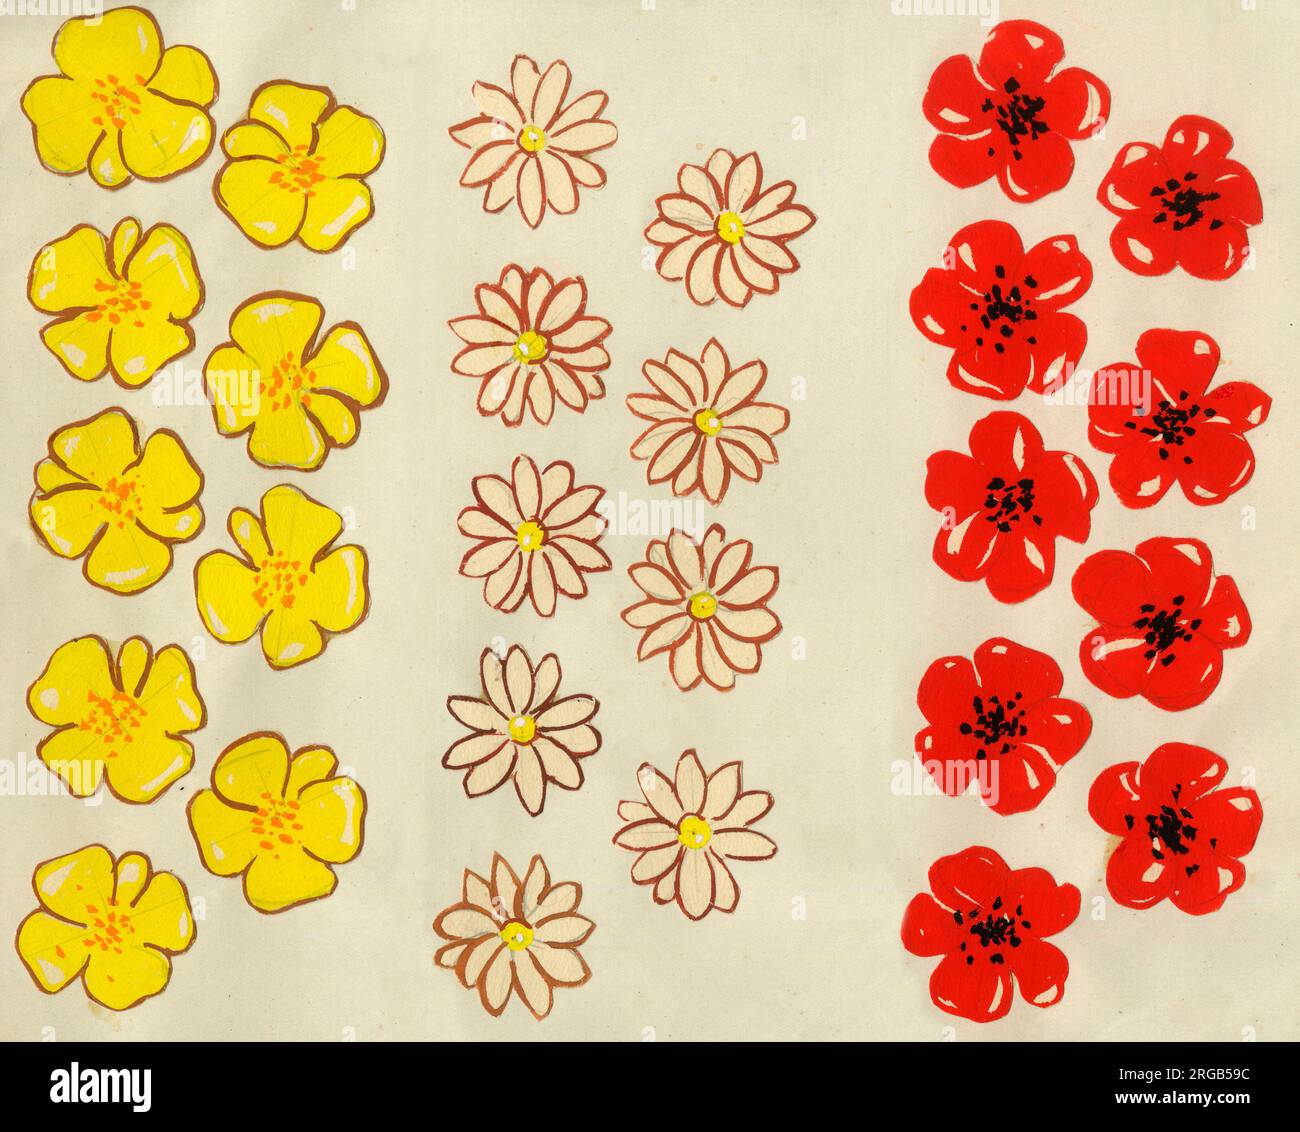 Original Artwork - painted flowers - counters for a game design, My Flower Day. Stock Photo